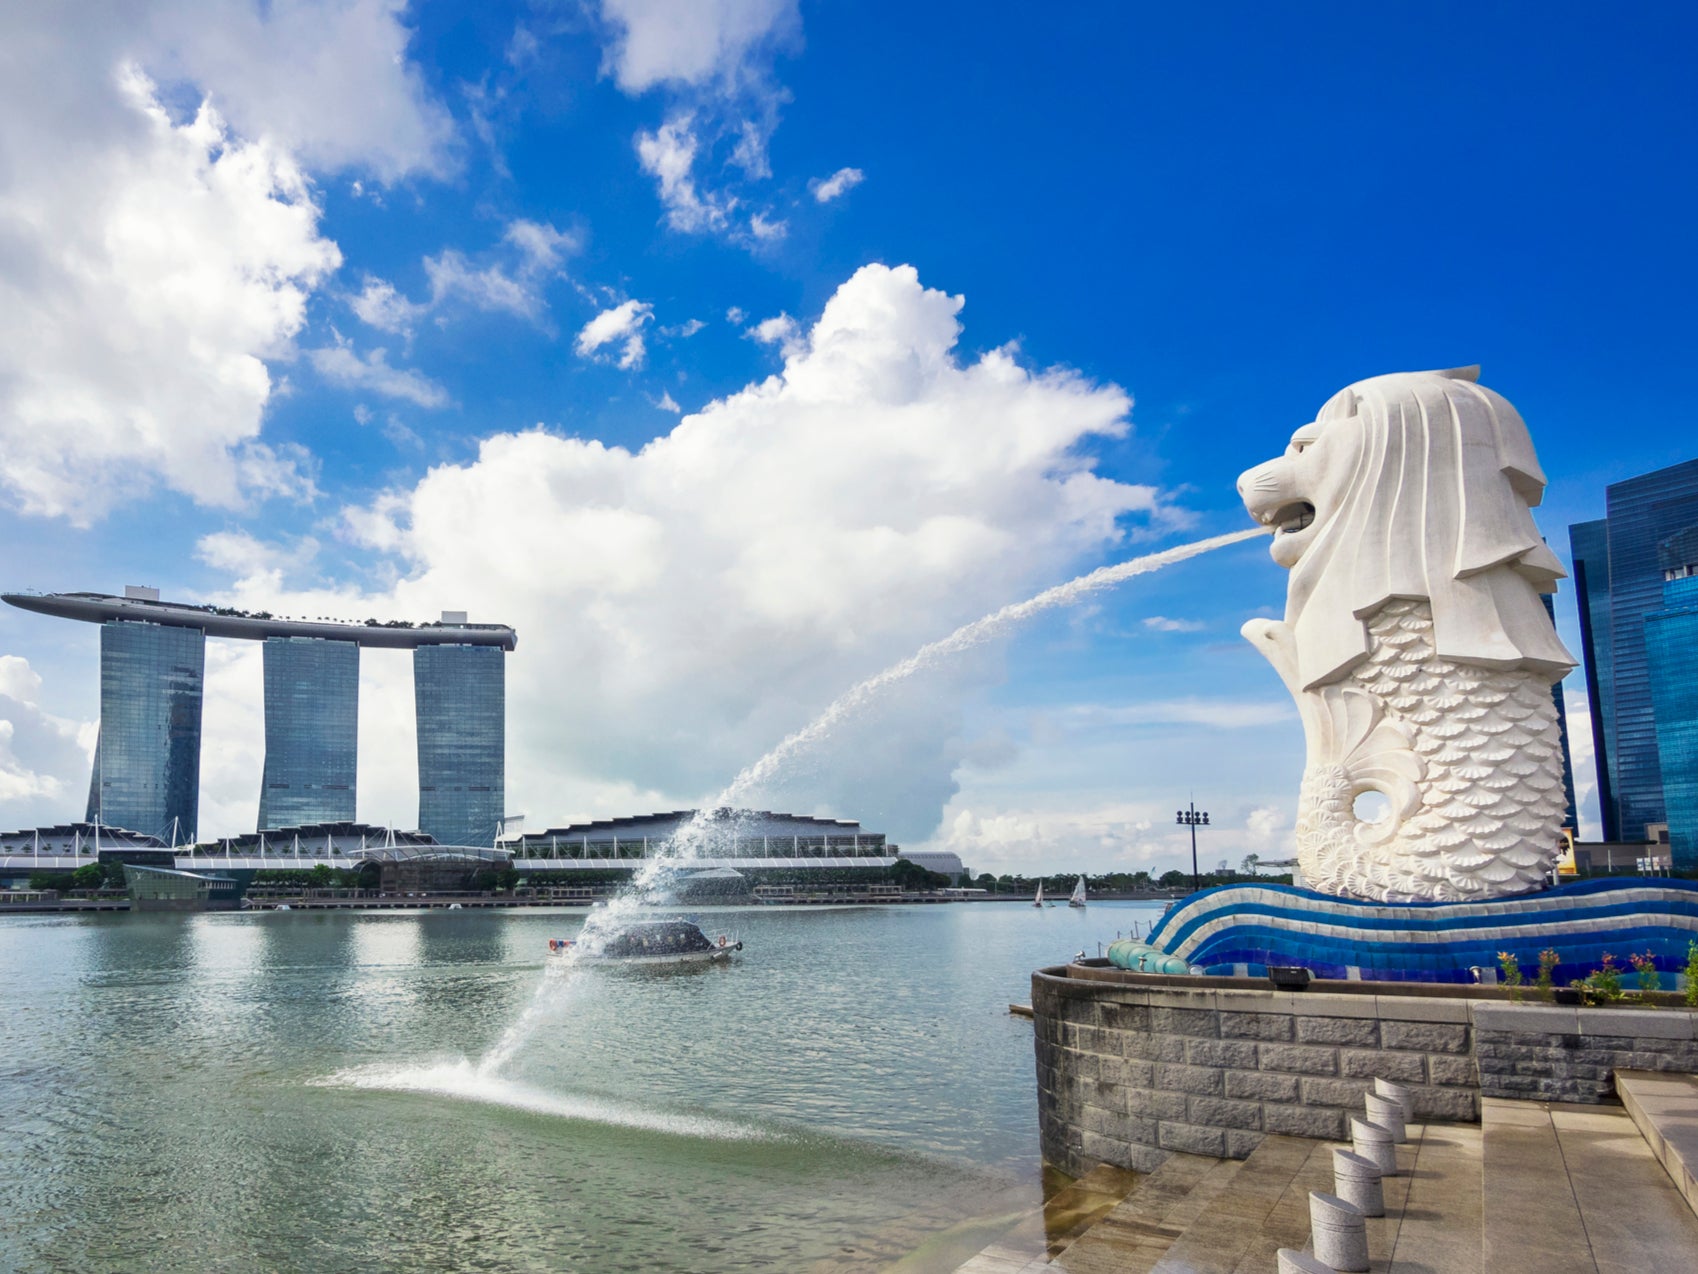 The mythical Merlion is Singapore’s national symbol